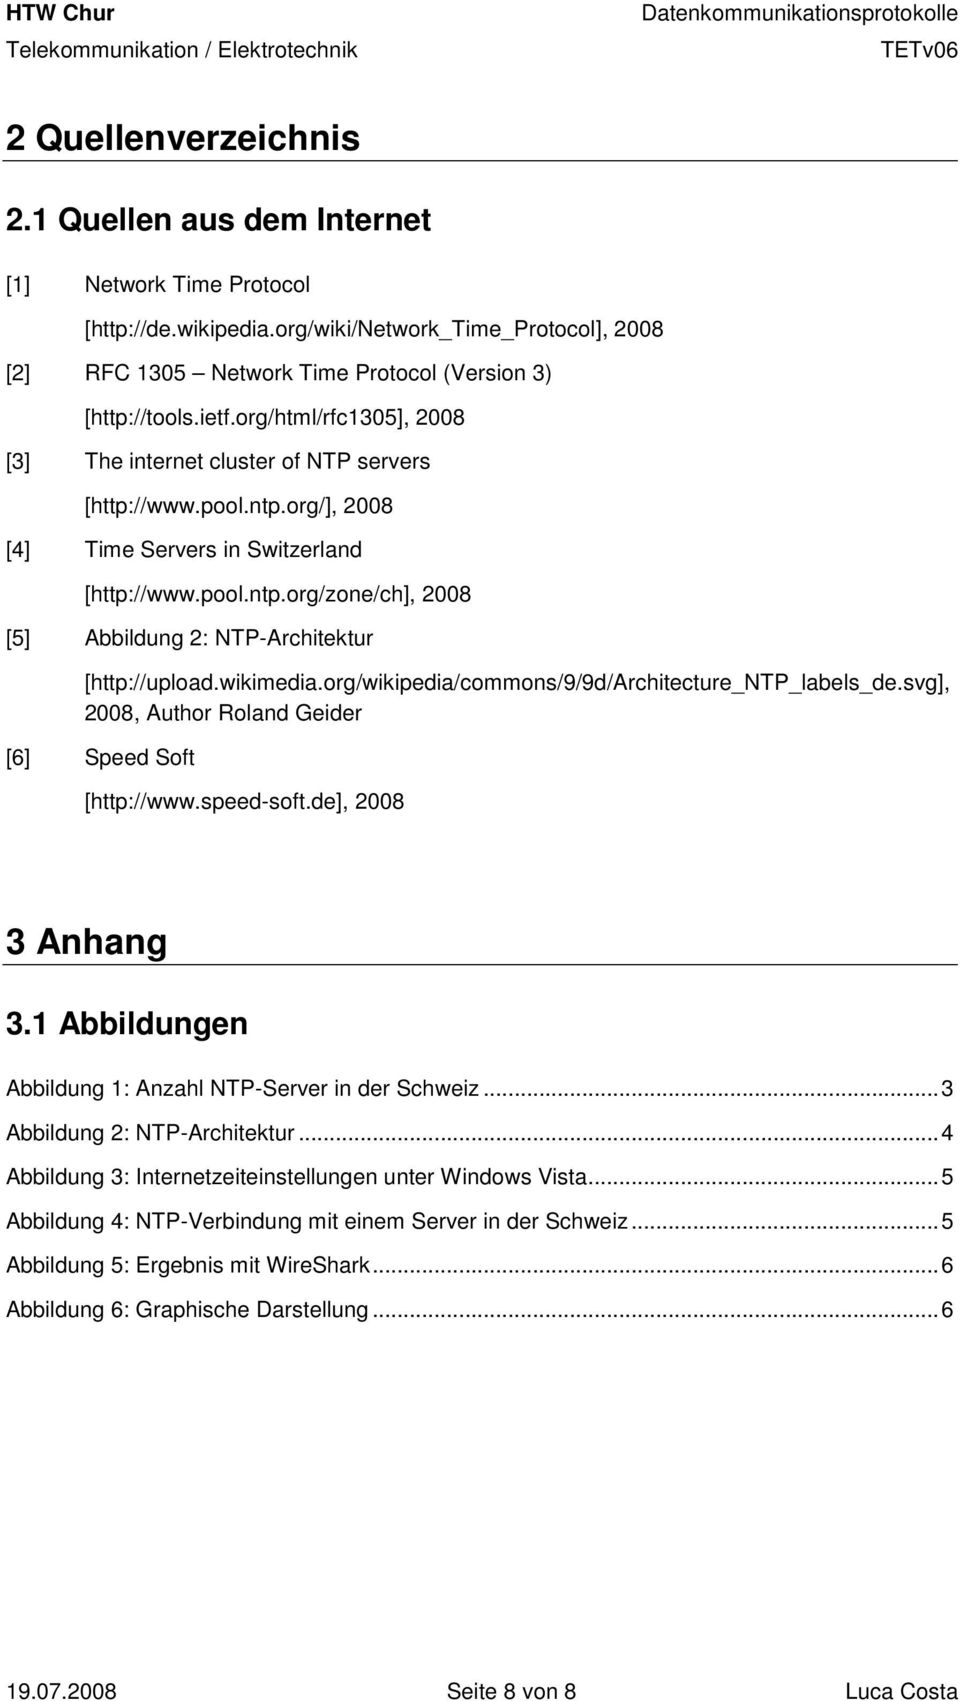 wikimedia.org/wikipedia/commons/9/9d/architecture_ntp_labels_de.svg], 2008, Author Roland Geider [6] Speed Soft [http://www.speed-soft.de], 2008 3 Anhang 3.